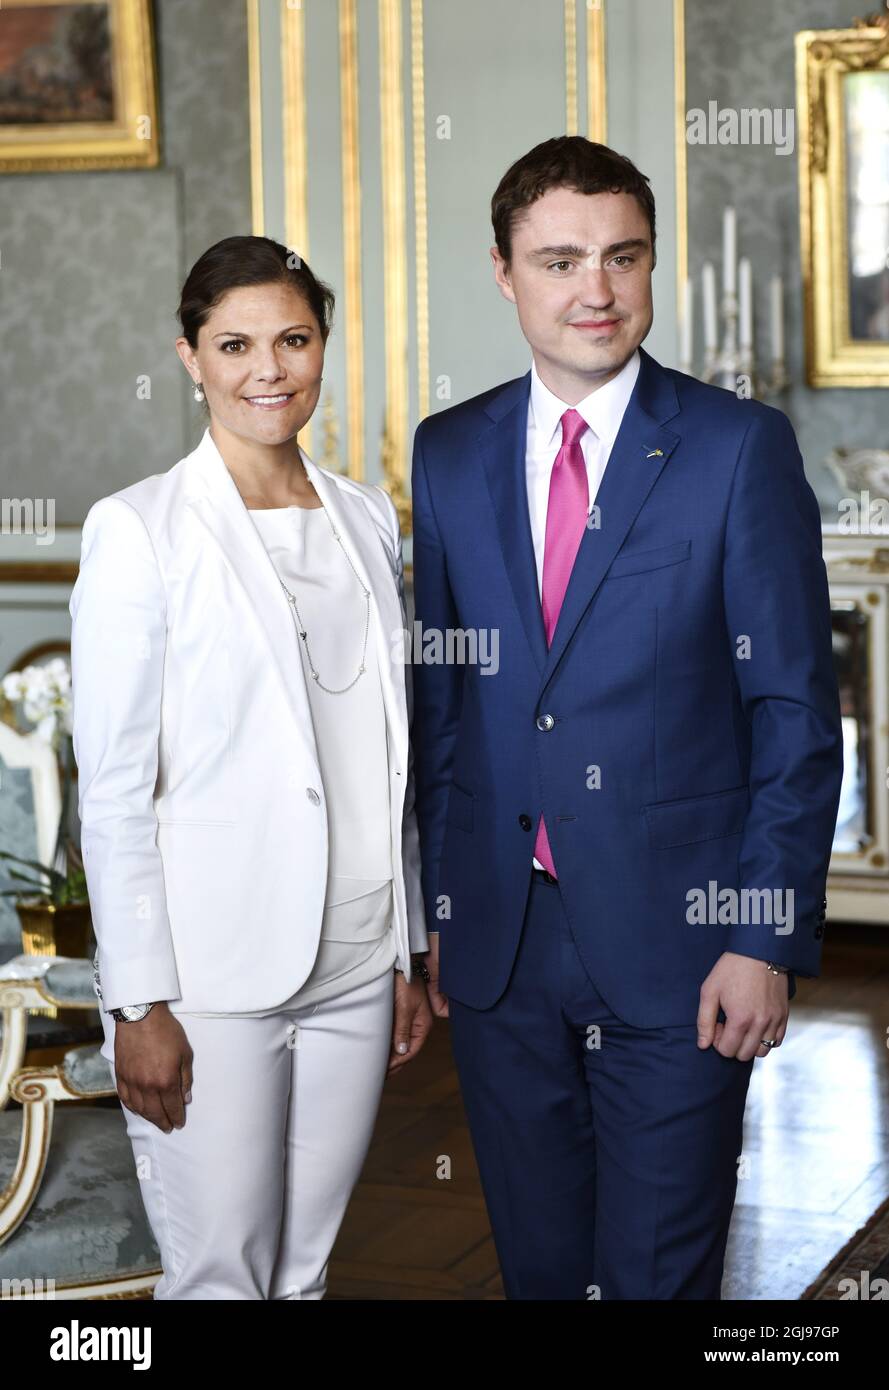 STOCKHOLM 2015-05-27 Estonian PM Taavi RÃµivas (R) and Swedish Crown Princess Victoria at during a reception at the Royal Palace in Stockholm, Sweden, May 27, 2015. RÃµivas visited Sweden for bilateral talks Wednesday. Photo Bertil Ericson / TT / Code 10000 ** SWEDEN OUT ** Stock Photo